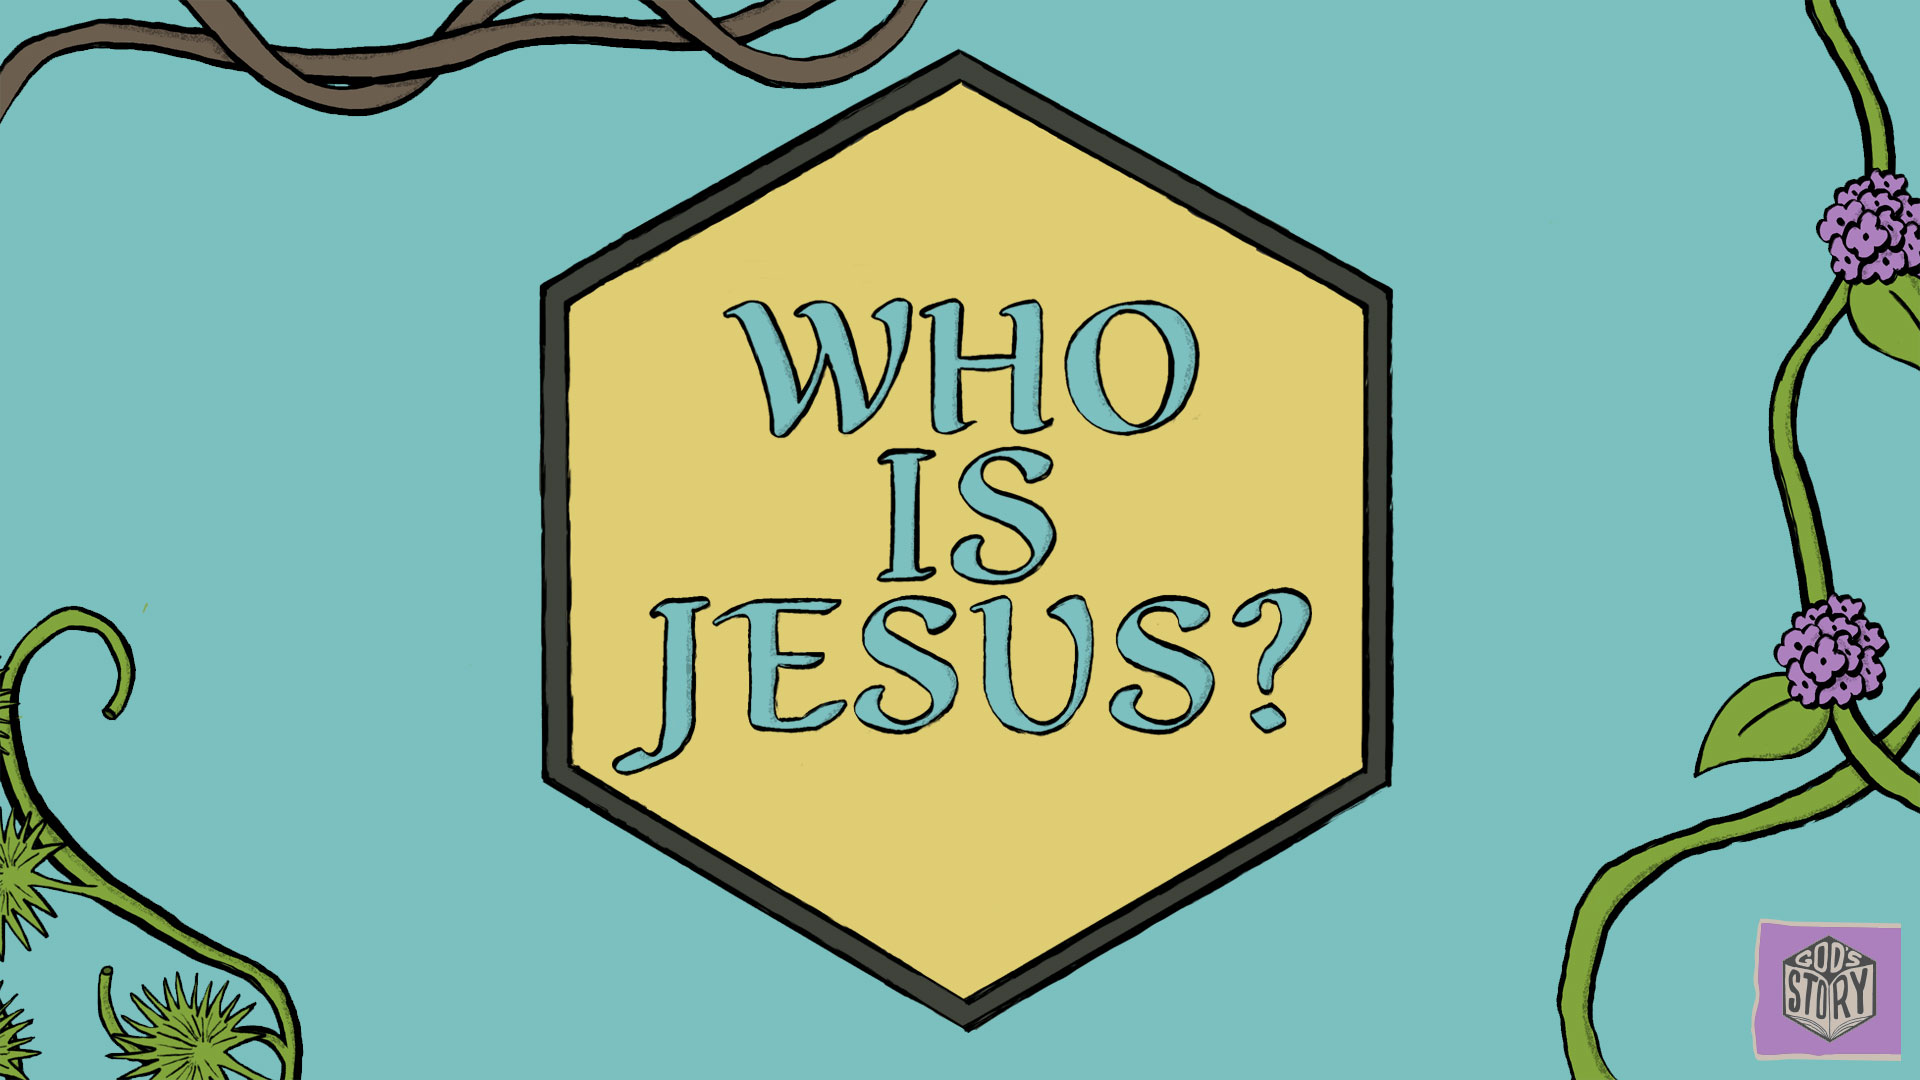 Who Do You Want Jesus to Be?